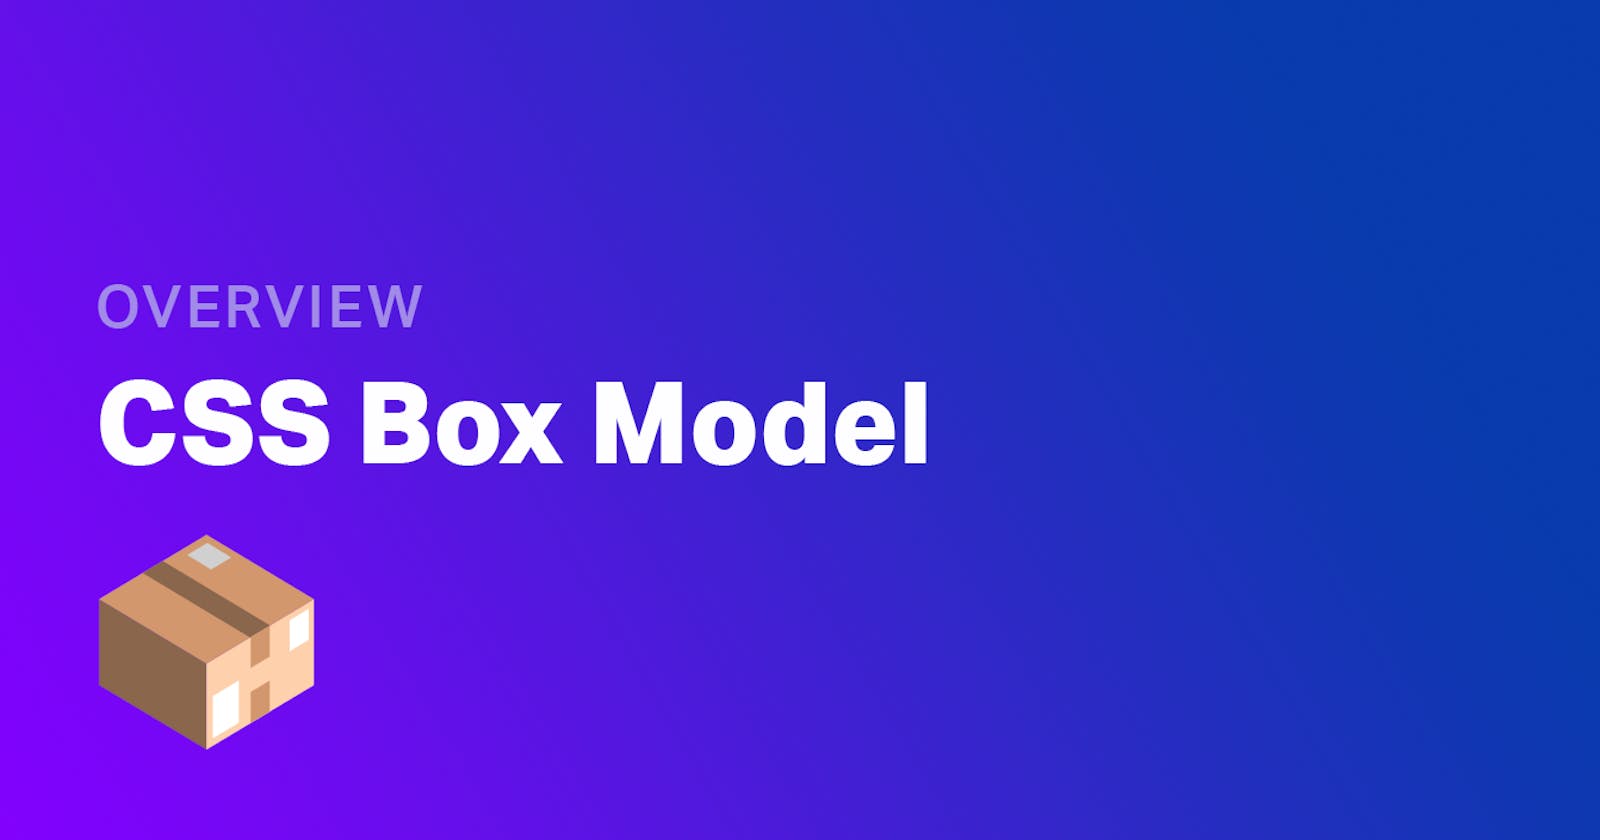 How the CSS Box Model Works